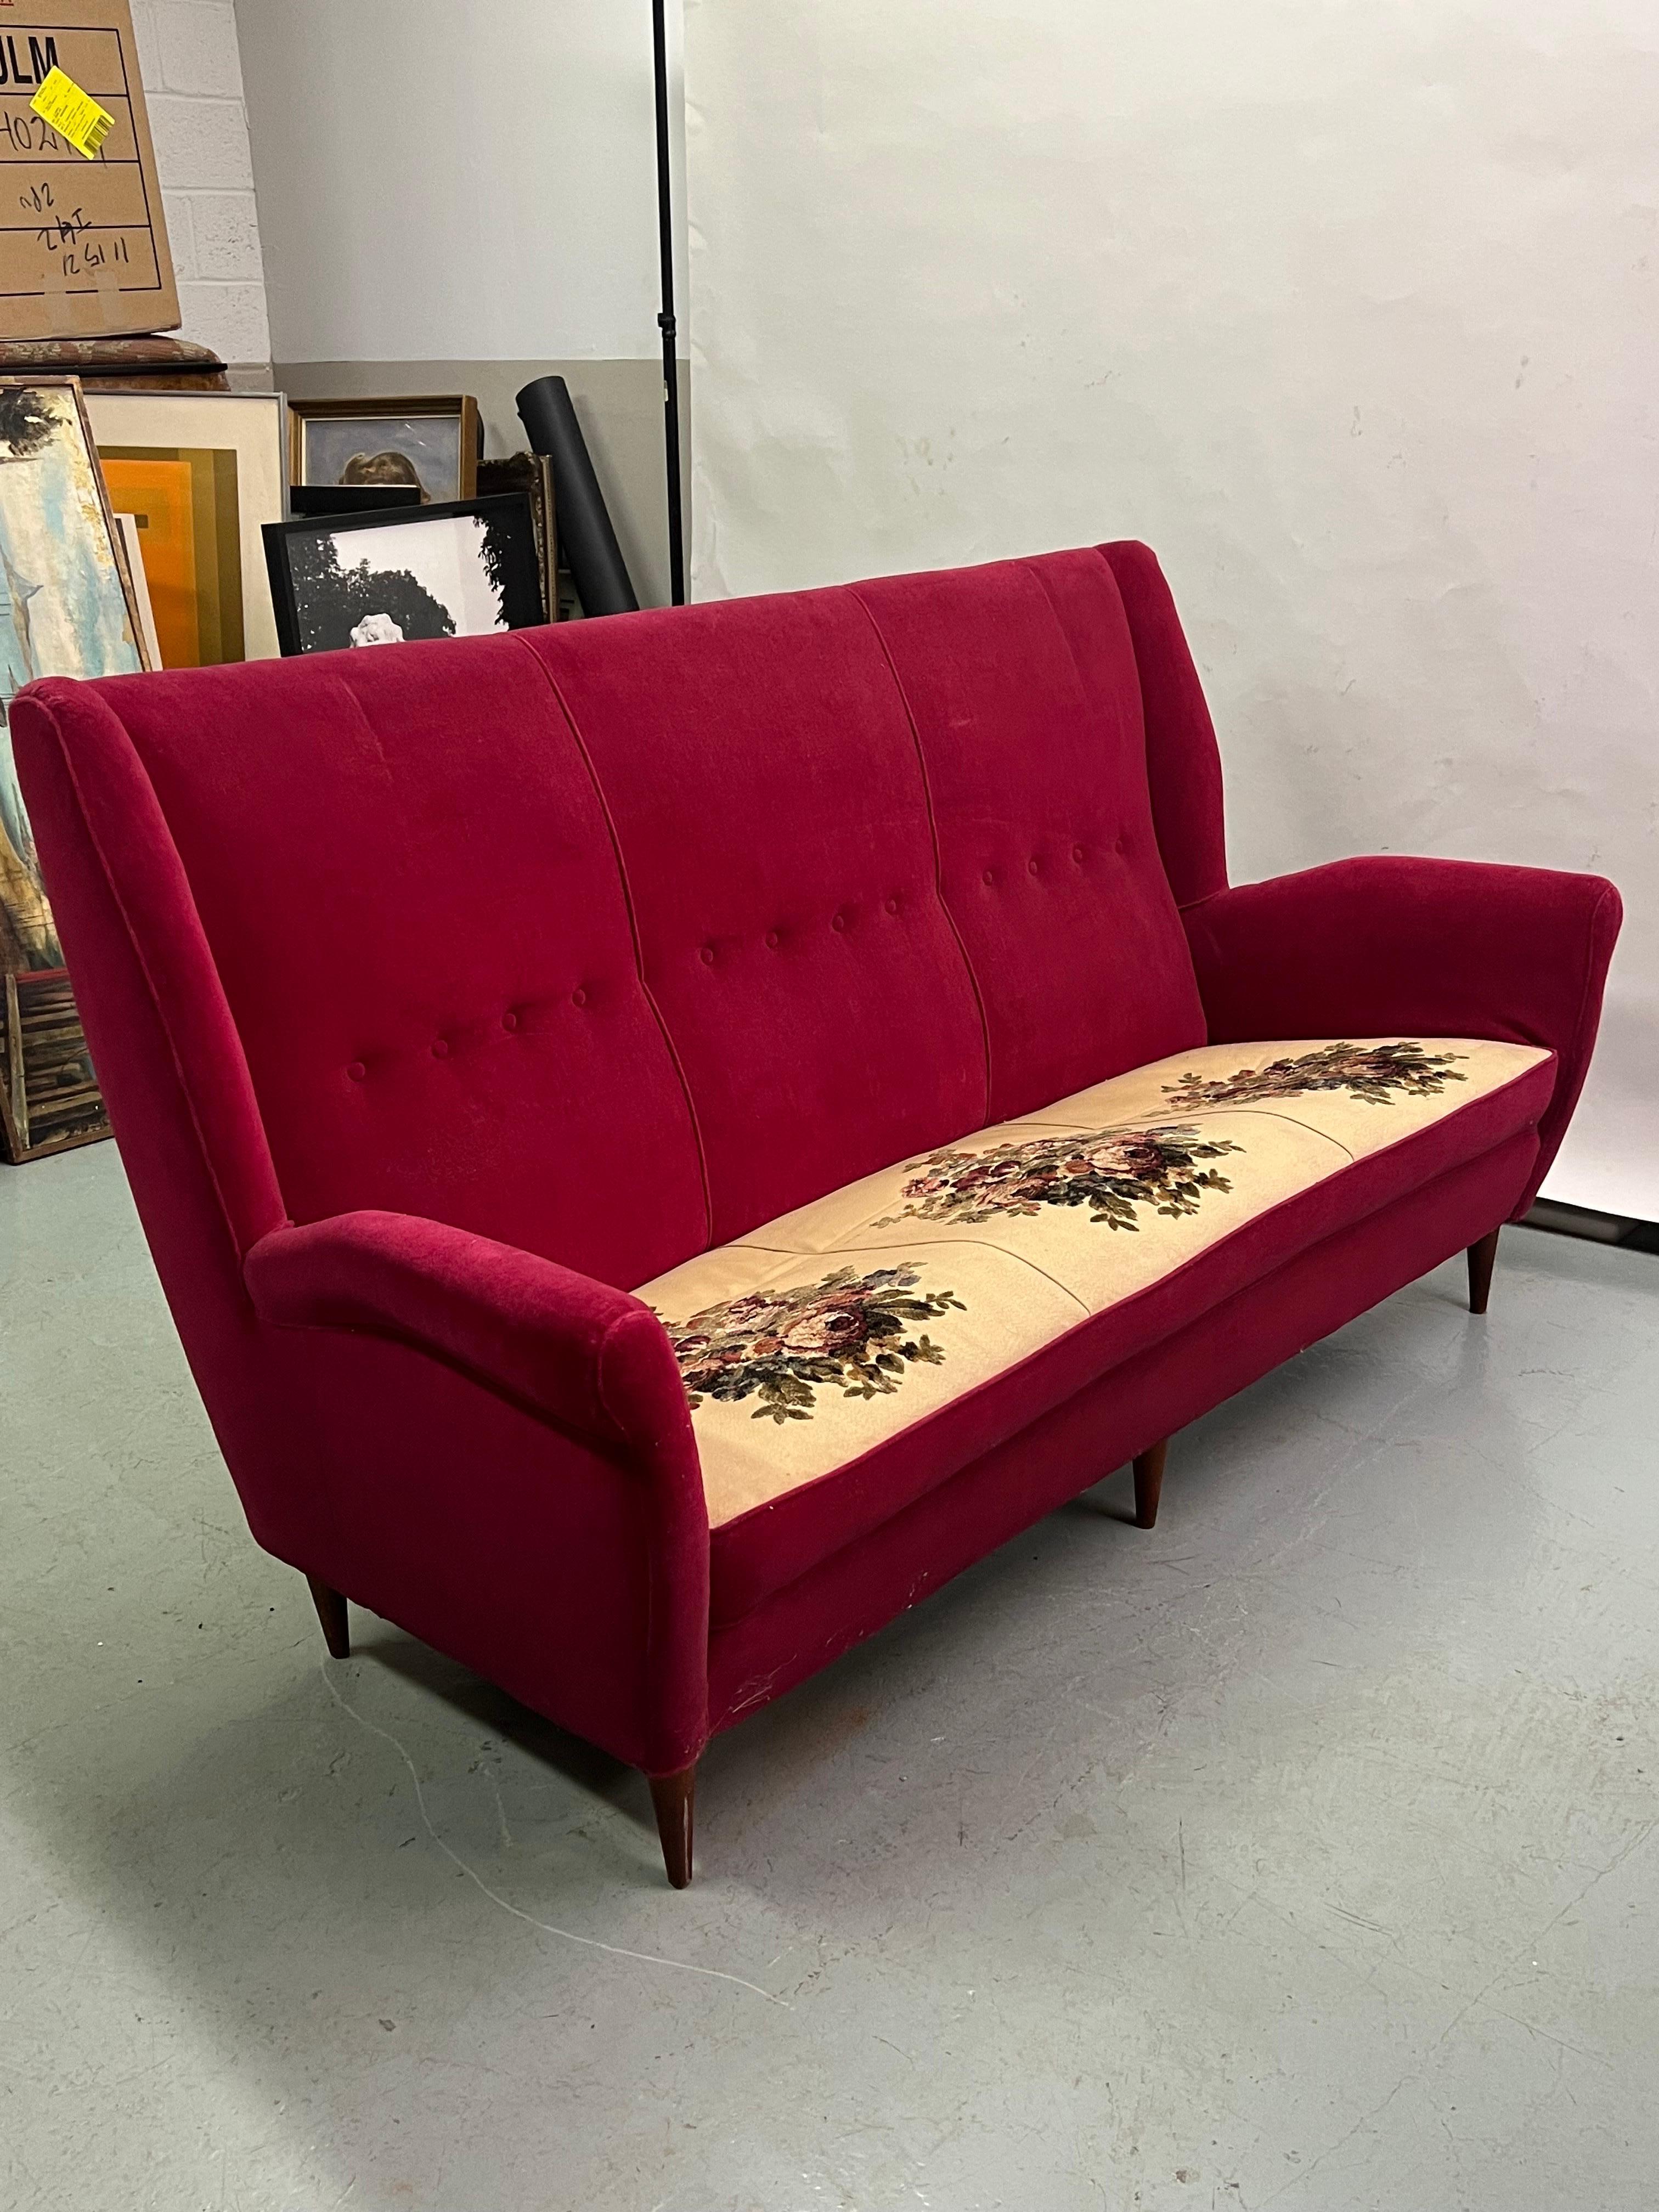 An elegant, stunning Italian Mid-Century Modern Sofa with modern neoclassical influences by Gio Ponti for Editions ISA, Bergamo, circa 1955. This sofa features a high back, wingback ears, a distinctive sculpted profile, refined sensuous lines and